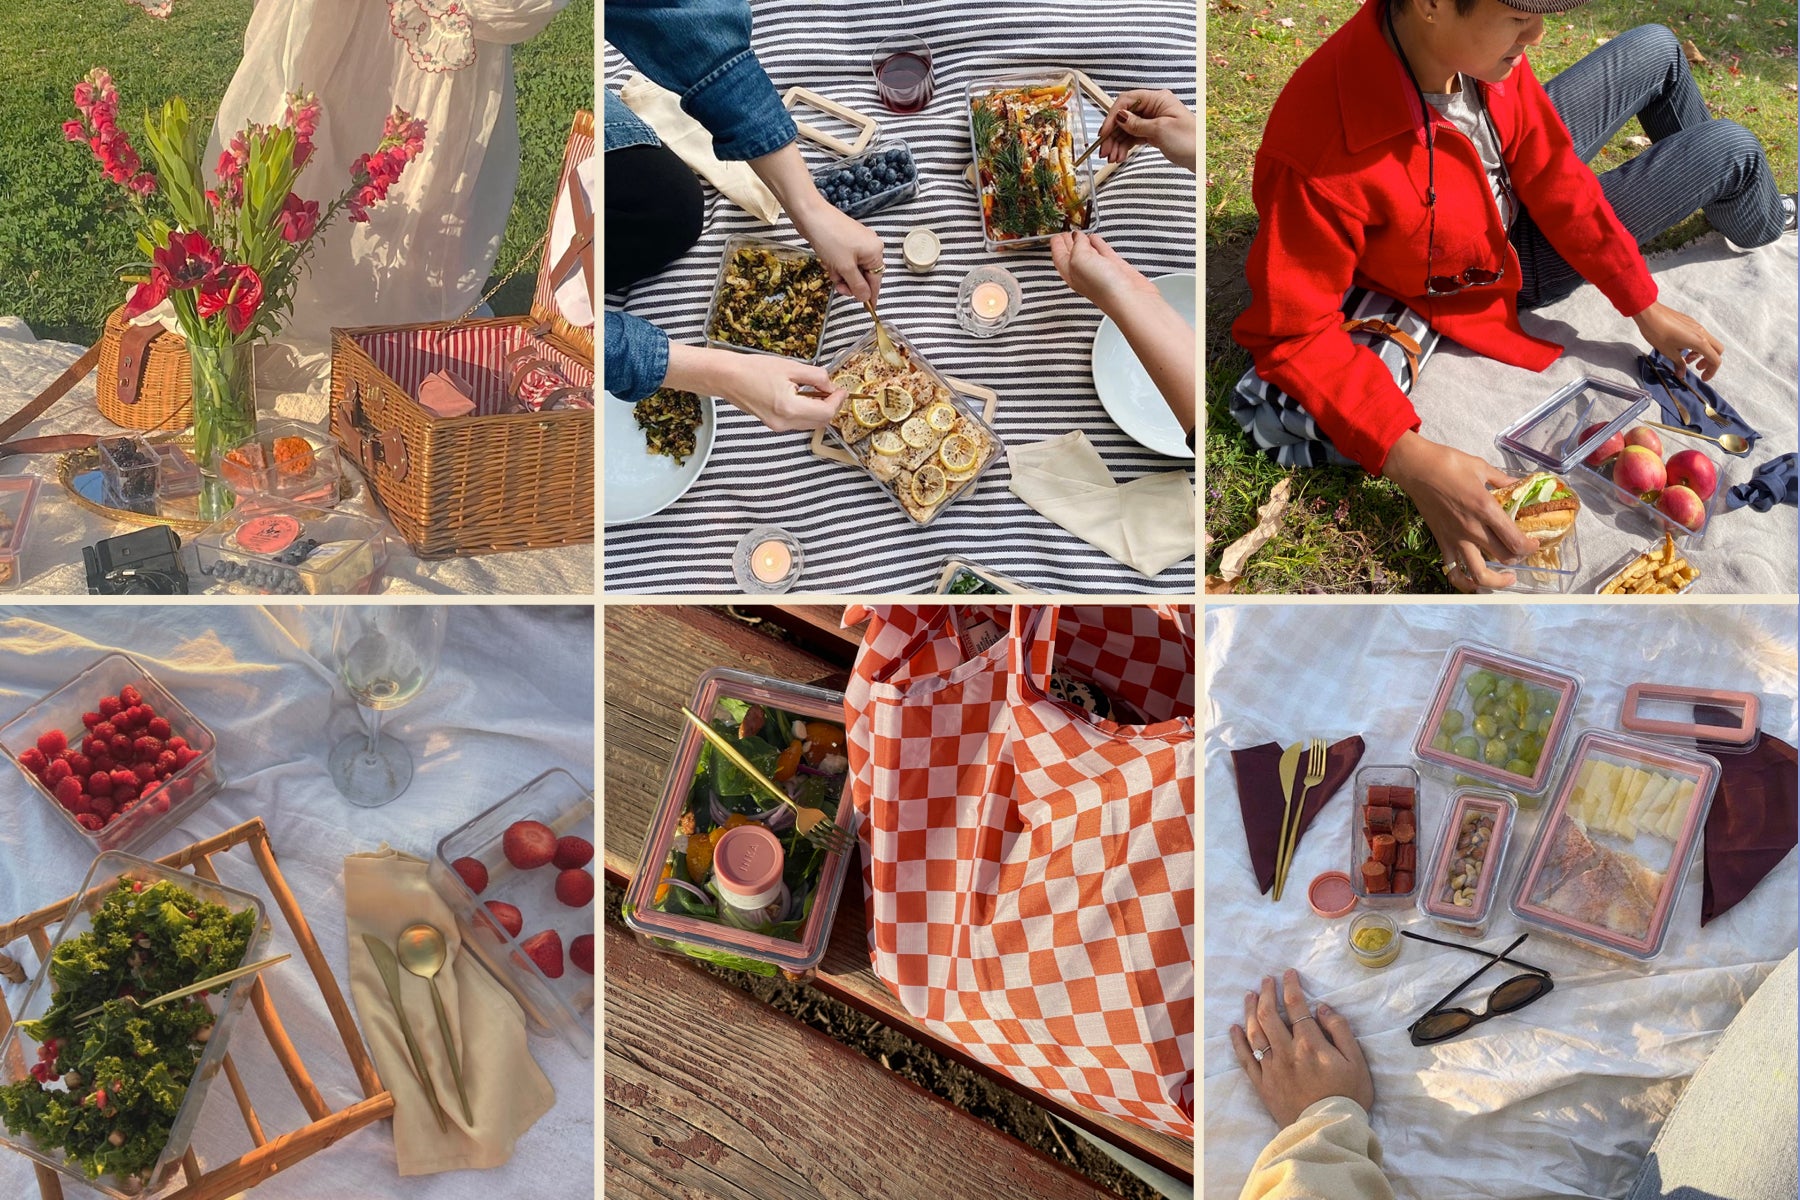 How to Plan the Perfect Picnic